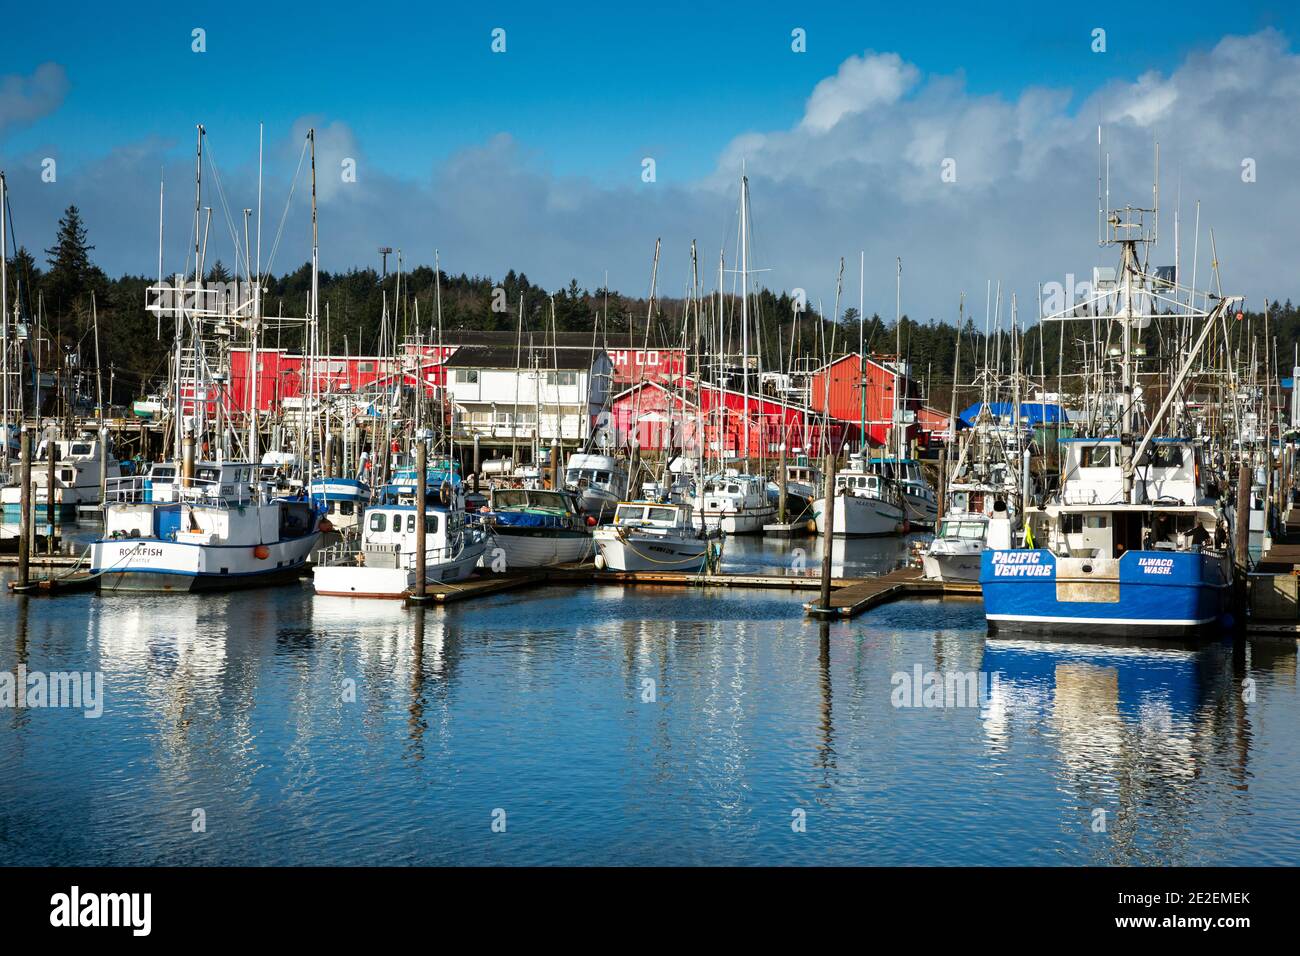 WA19132-00...WASHINGTON - The fishing and charter boats tied up at dock in the Illwaco Harbor located on the Columbia River. Stock Photo